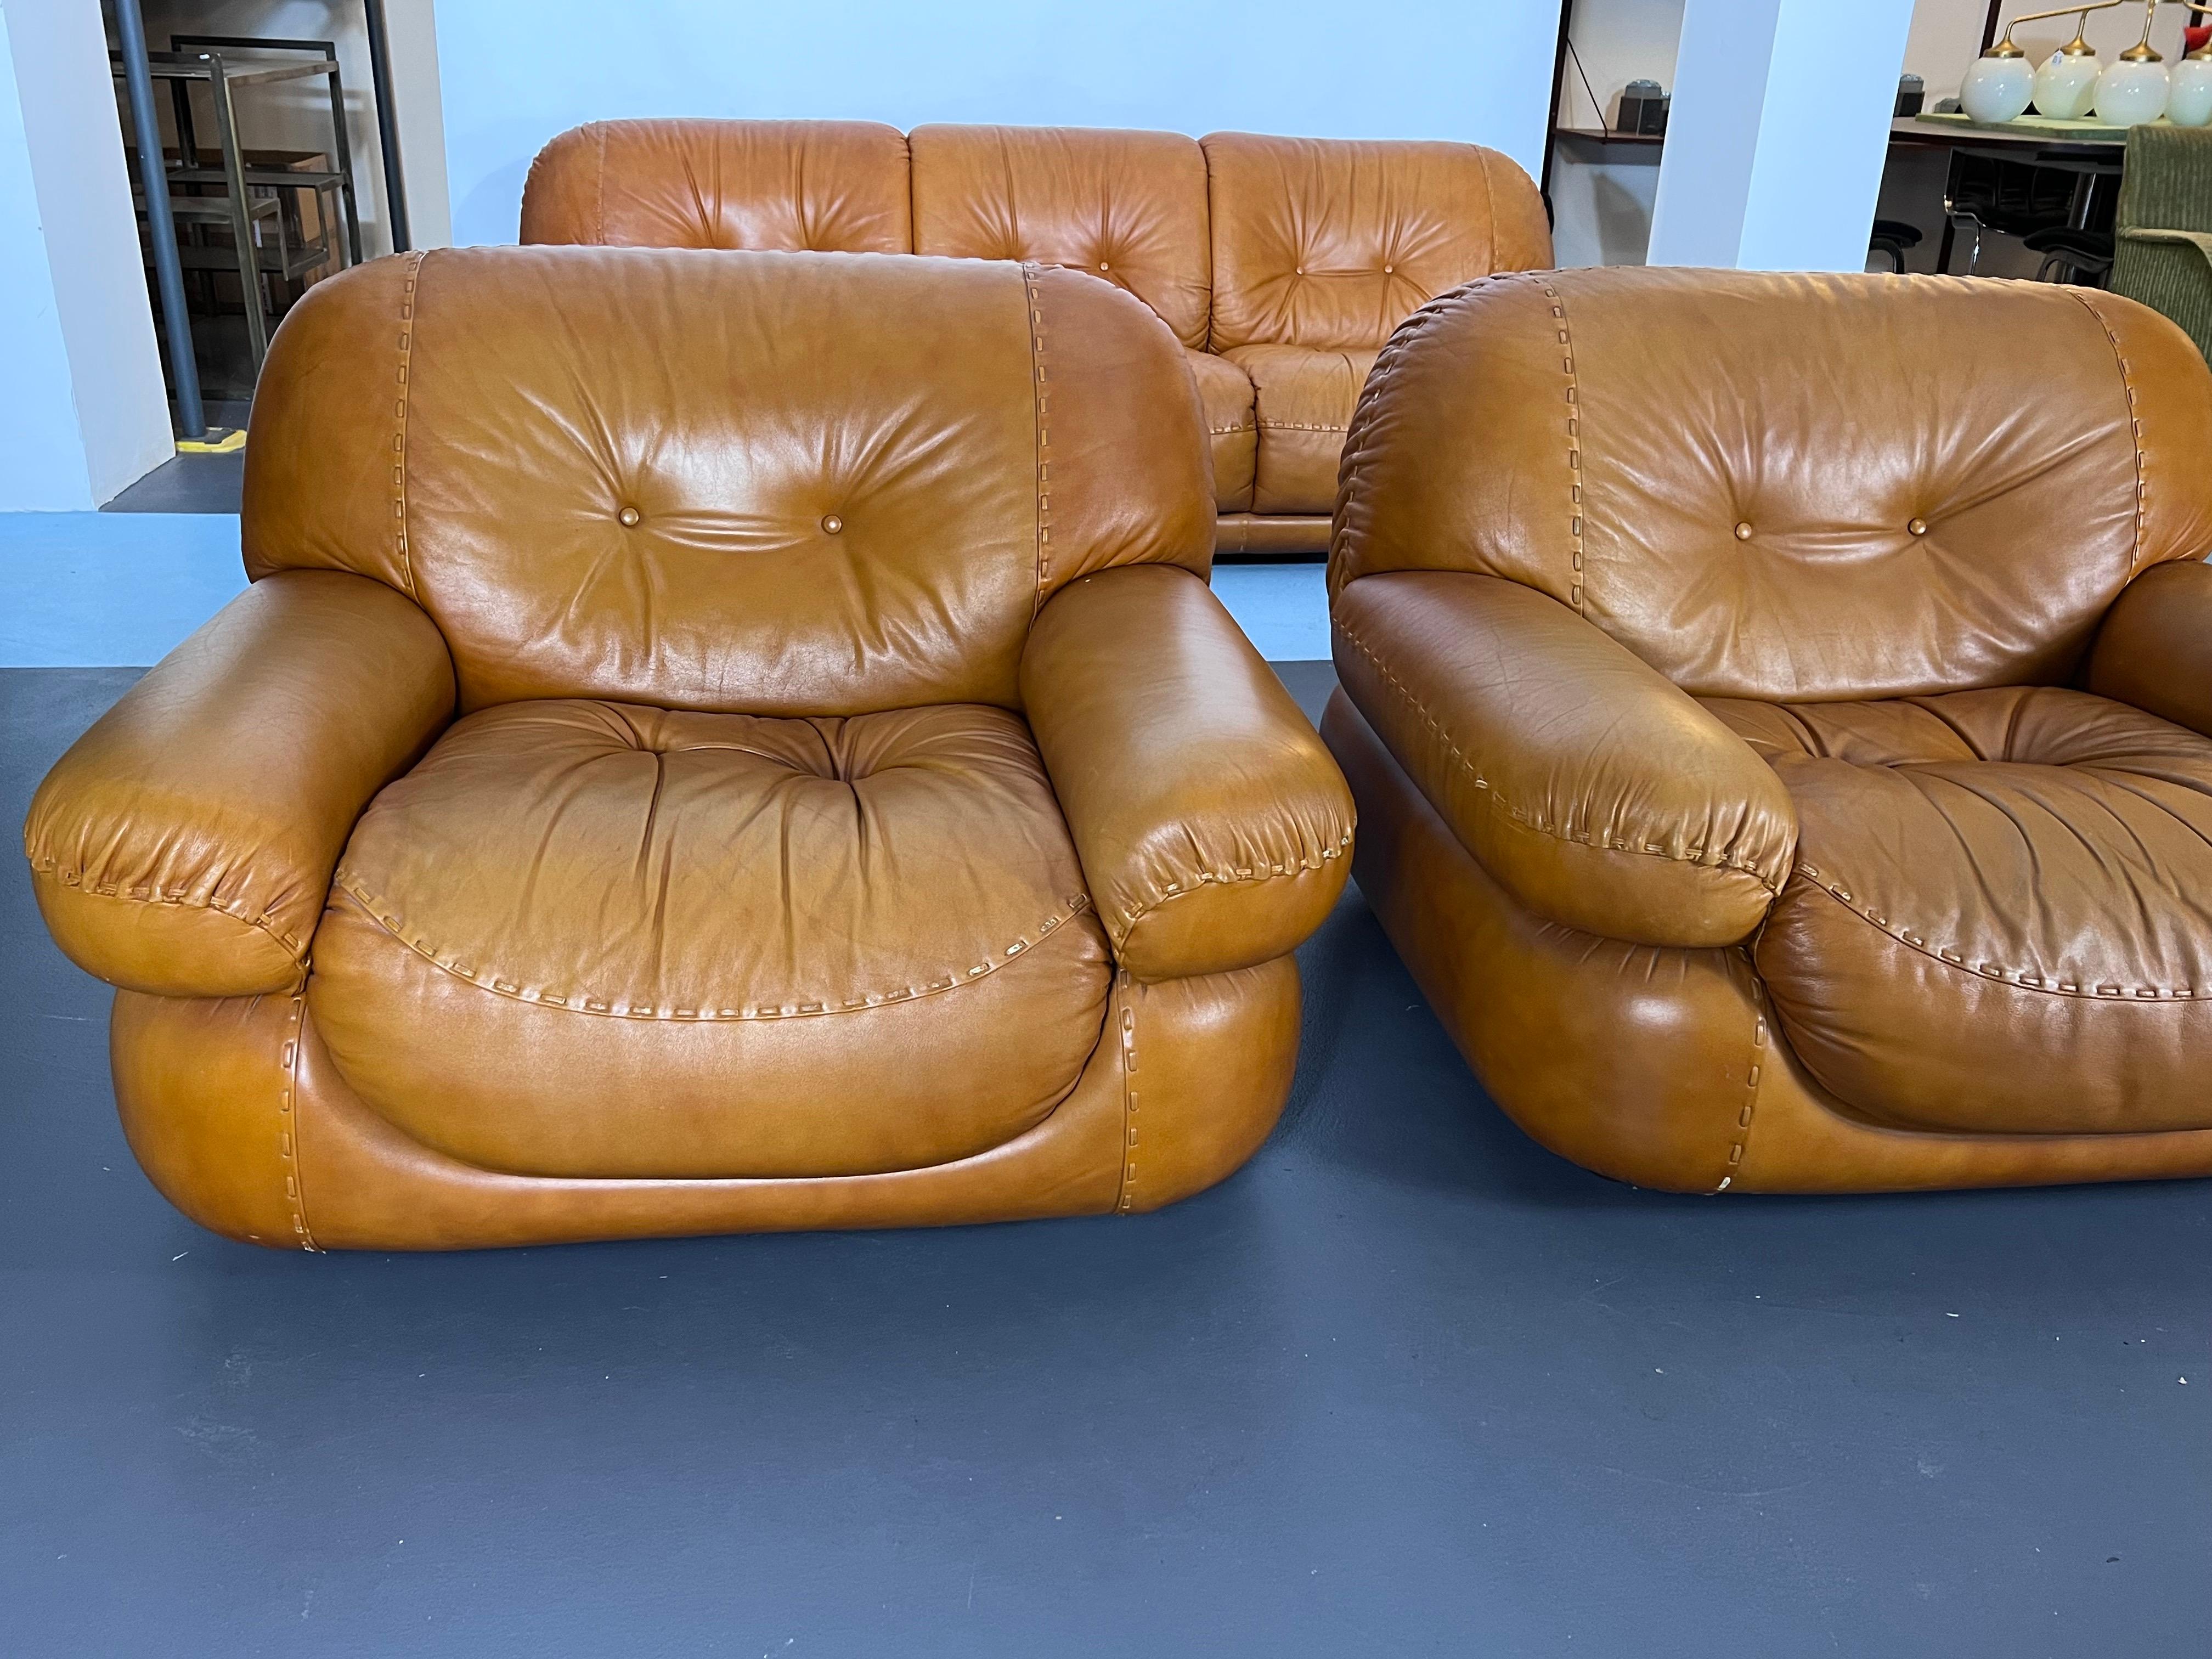 Mid-Century Modern Vintage Sofa Set in Cognac Leather by Sapporo for Mobil Girgi, Italy, 1970s For Sale